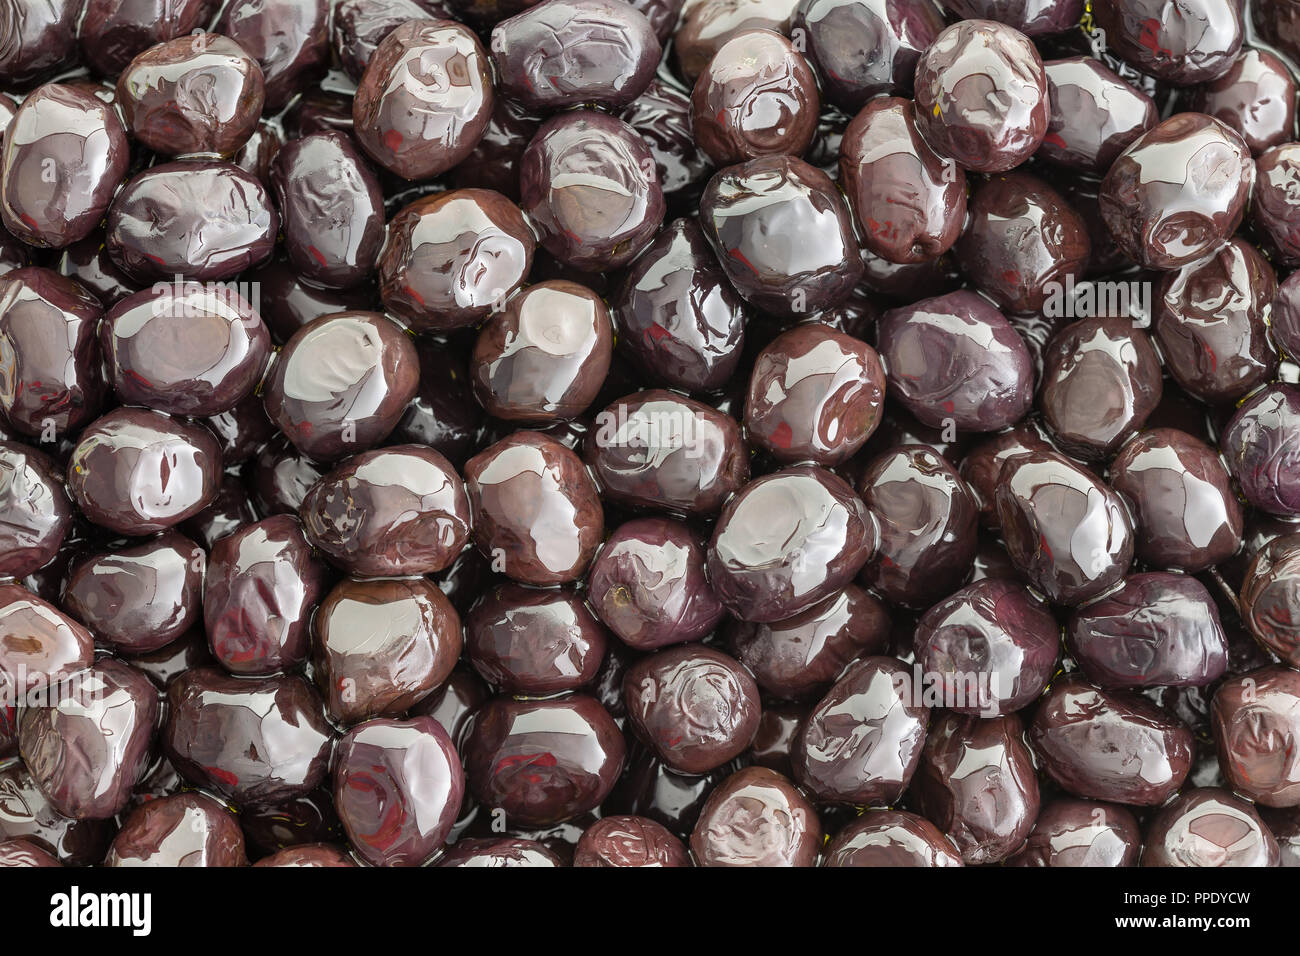 Tasty brine cured Grade A Mediterranean black olives in a close up full frame view for a healthy appetizer or snack or used as an ingredient in cookin Stock Photo